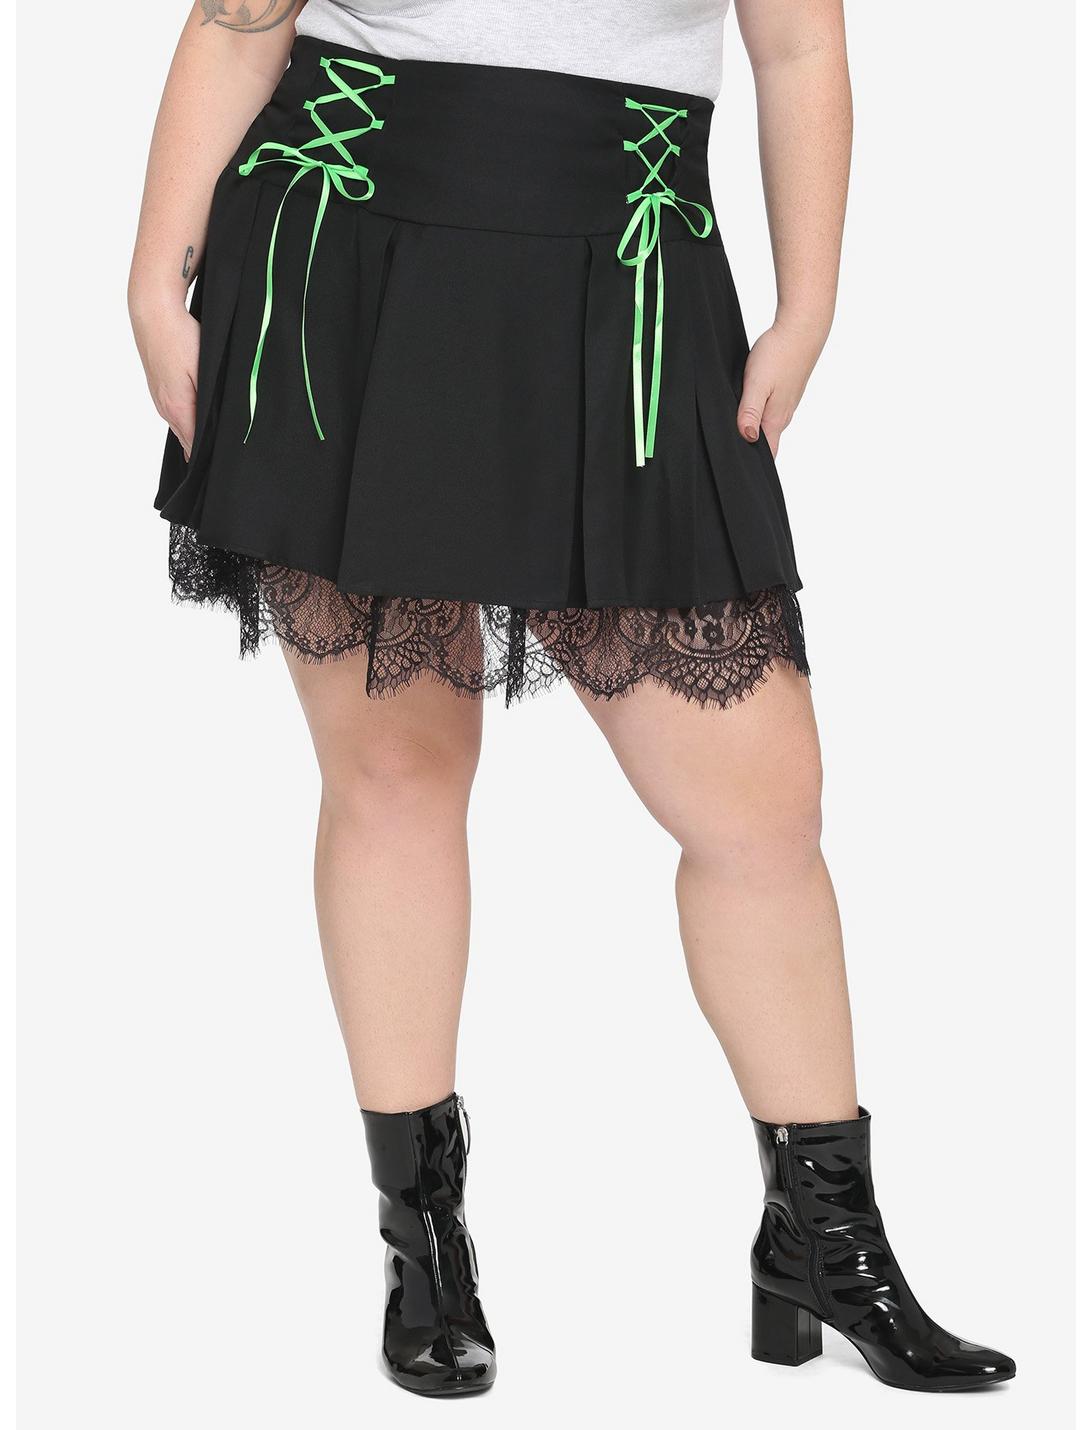 Black & Green Lace-Up Pleated Skirt Plus Size, BLACK, hi-res